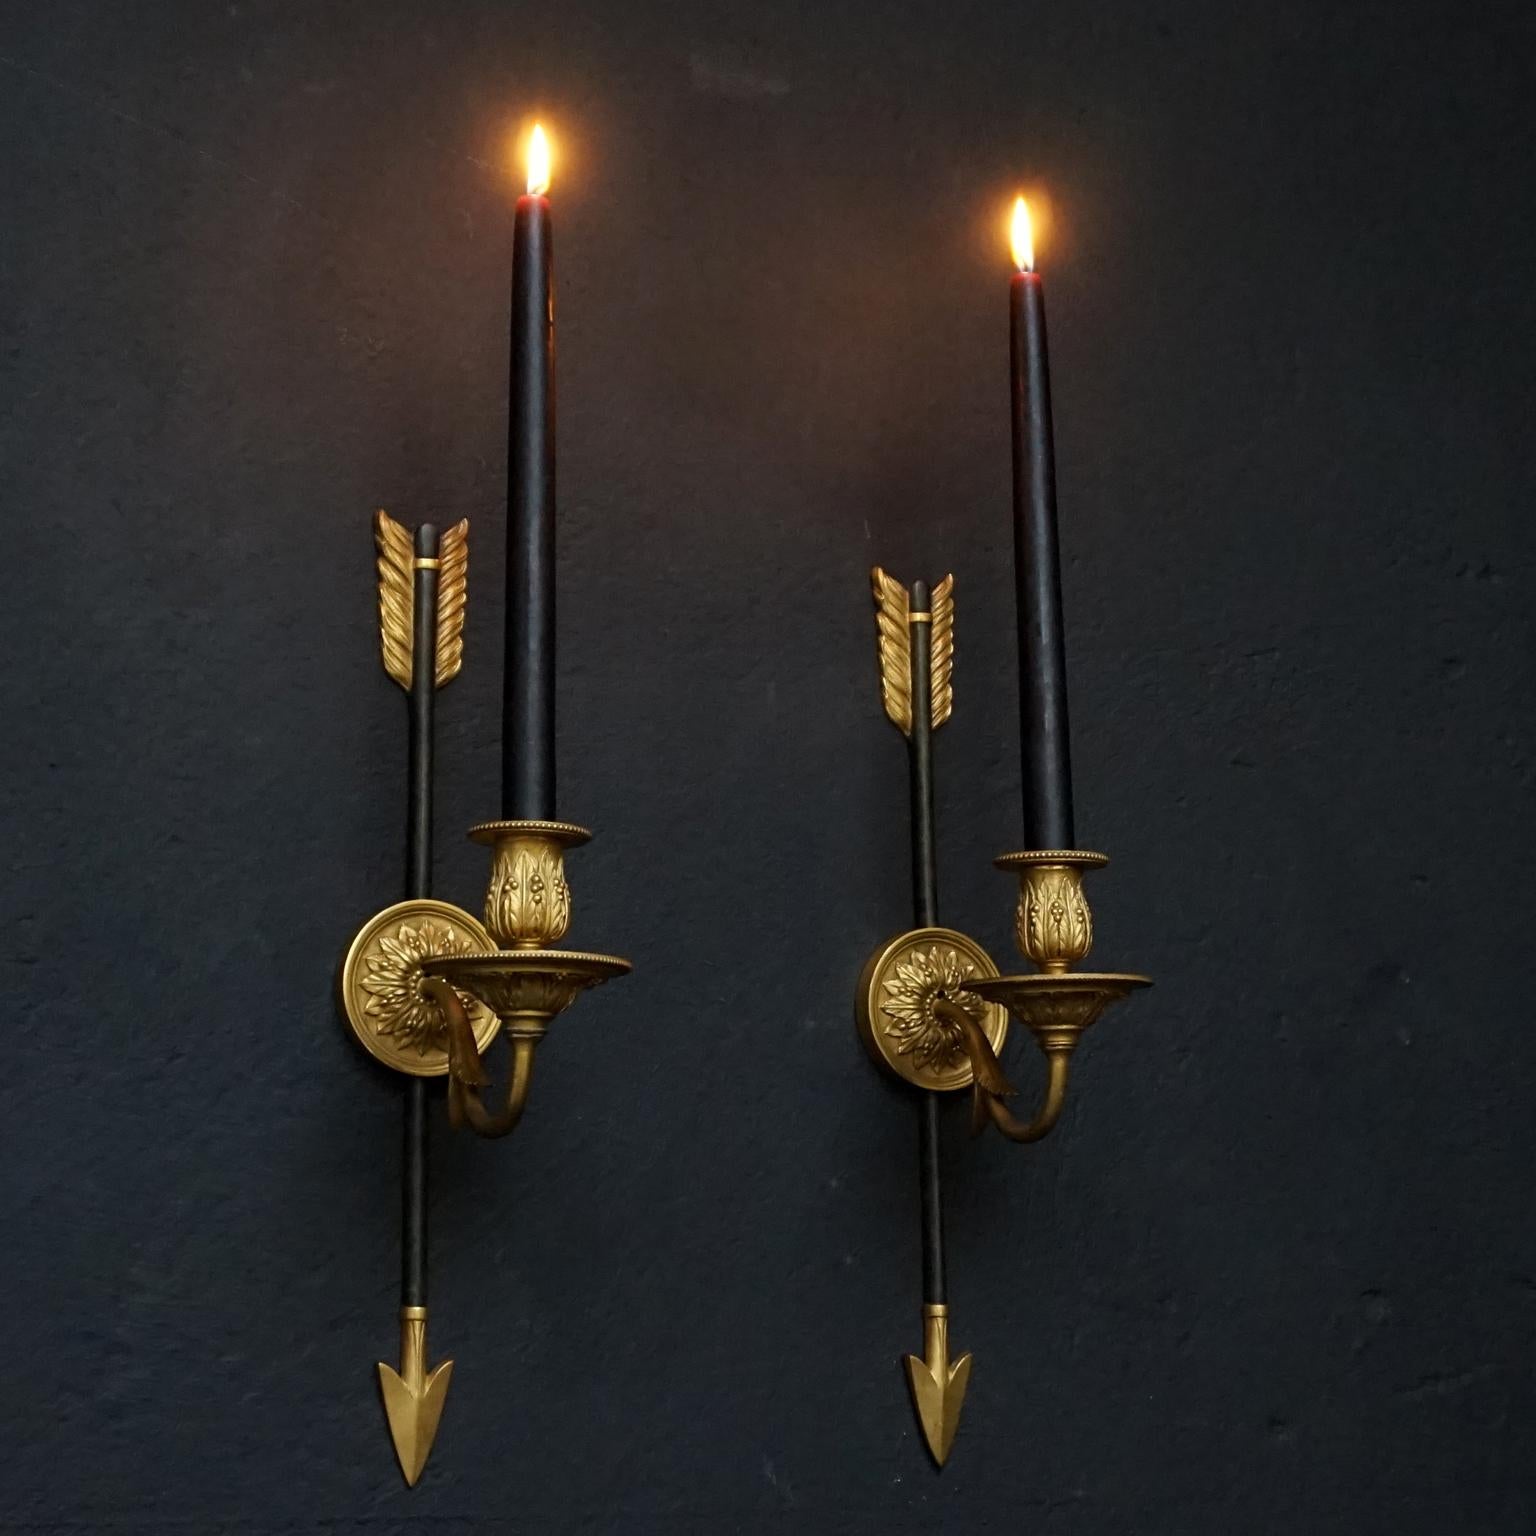 Antique pair of French First Empire doré bronze wall candlesticks in arrow form.
Decorated with palmette or palm leaf decor. 

These sconces have not been electrified but they have holes so they could easily be modified.

This set comes with a